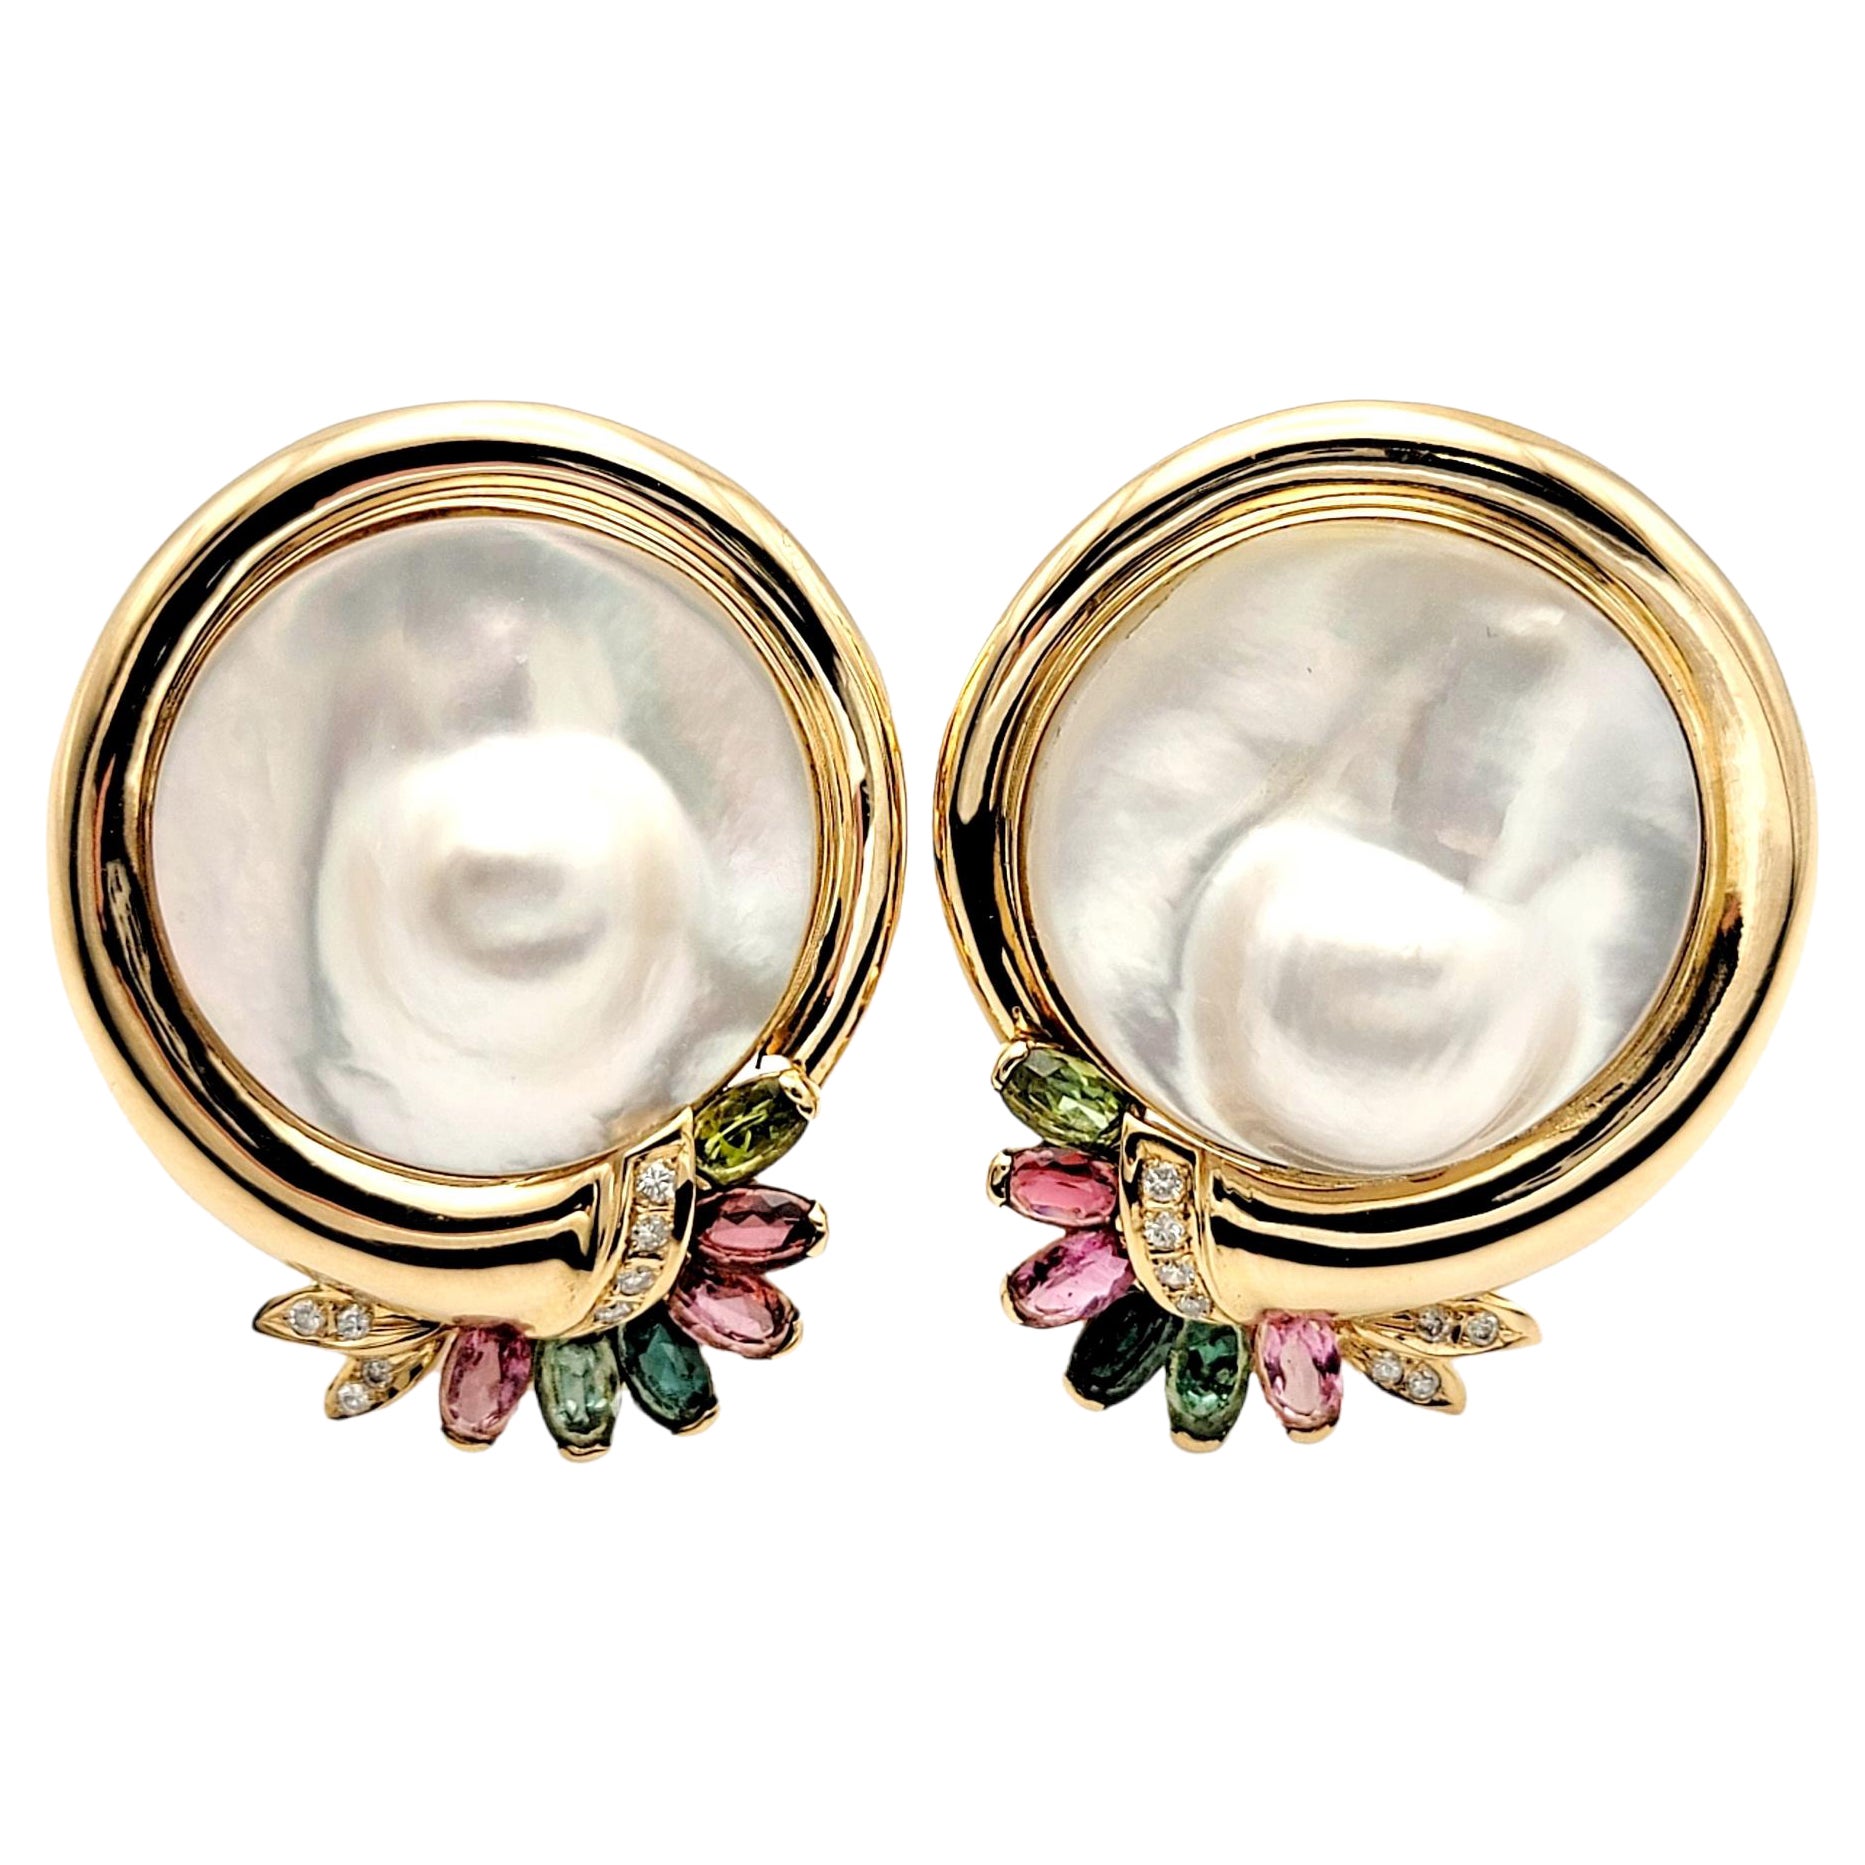 Cultured Mabe Blistered Pearl 14 Karat Gold Earrings with Diamonds and Gemstones For Sale